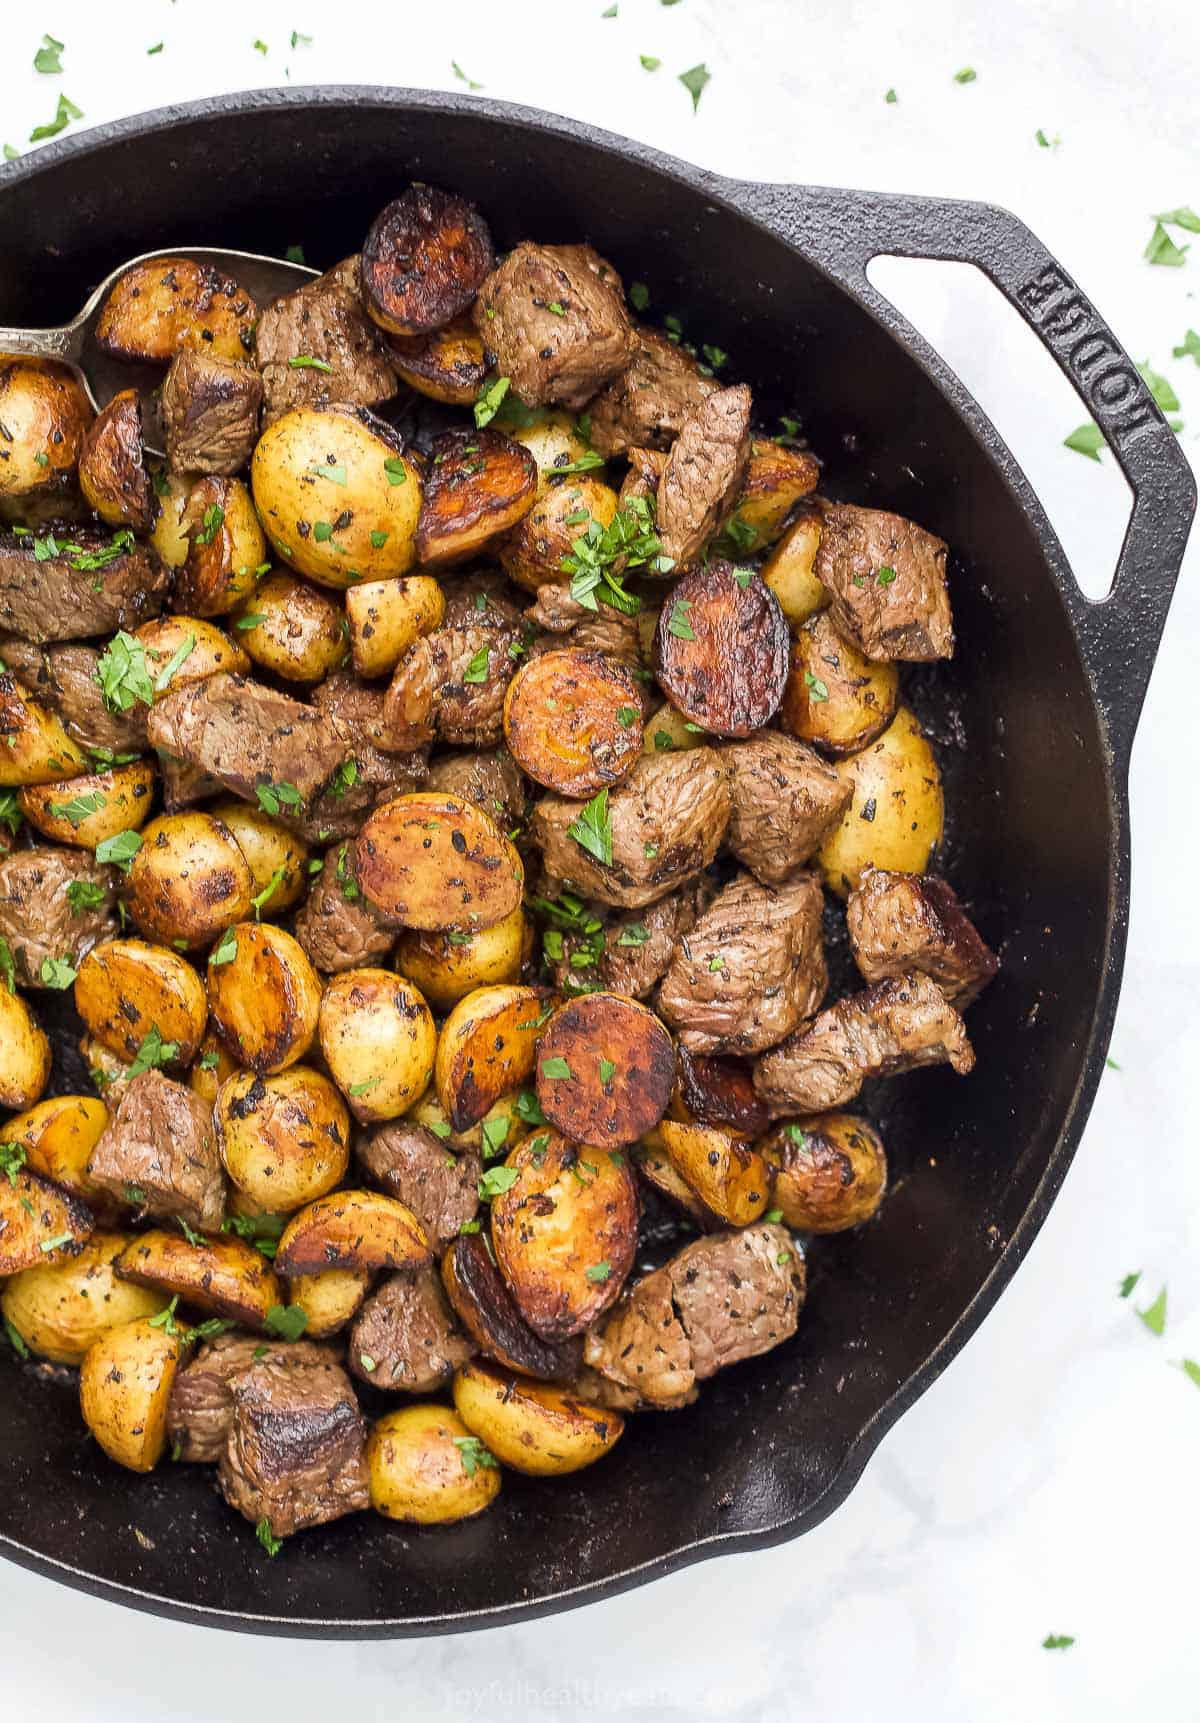 Overhead view of garlic butter steak bites and potatoes in a skillet